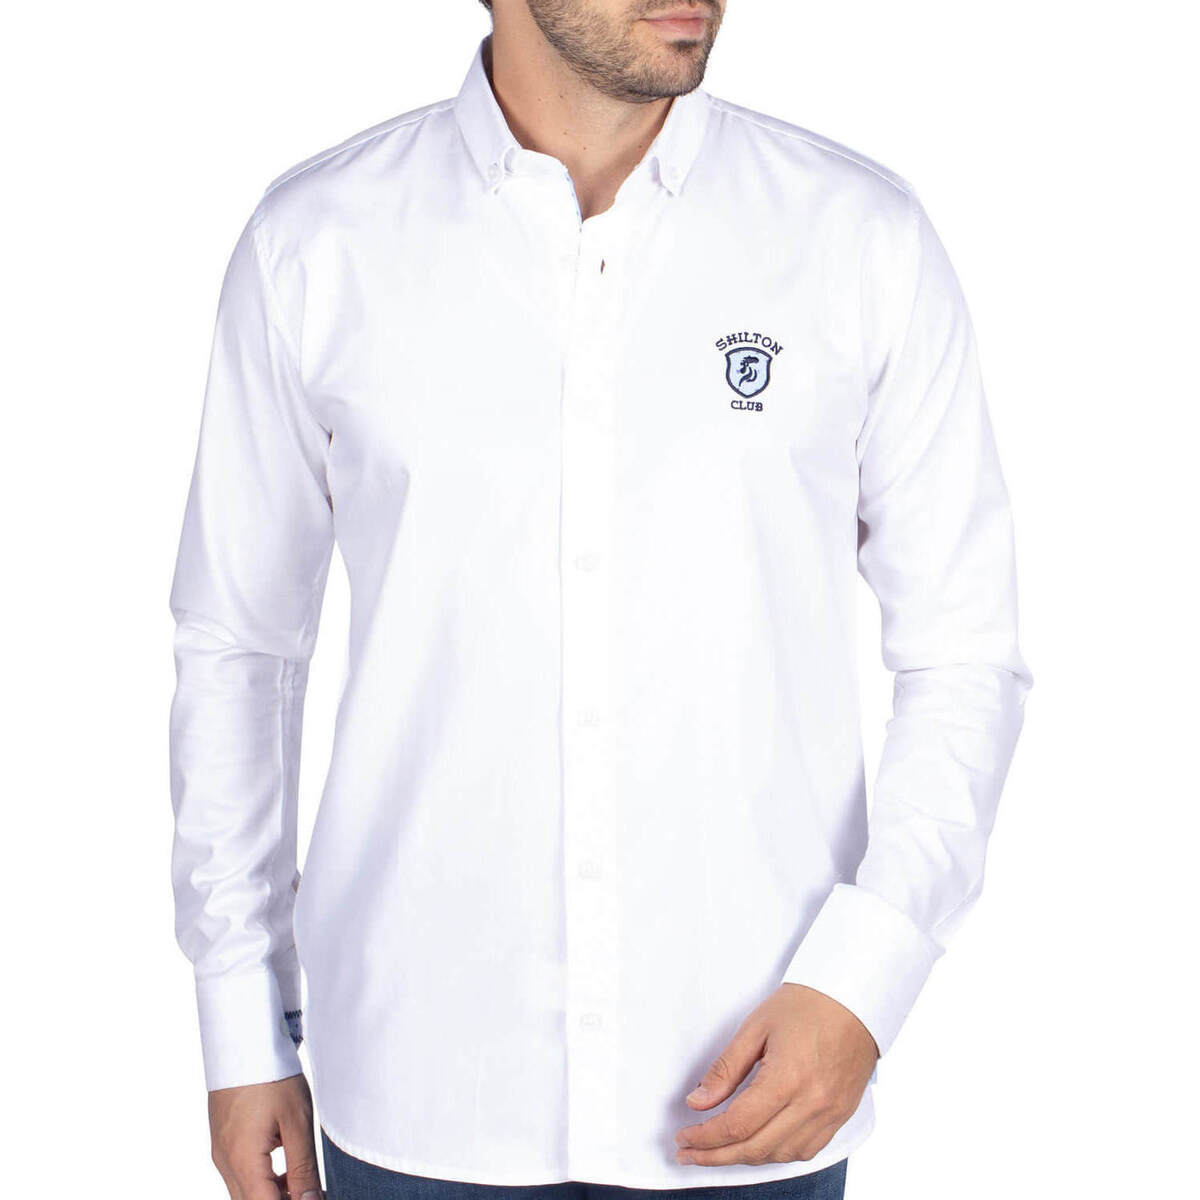 Vêtements Homme The home deco fa Chemise club RUGBY 